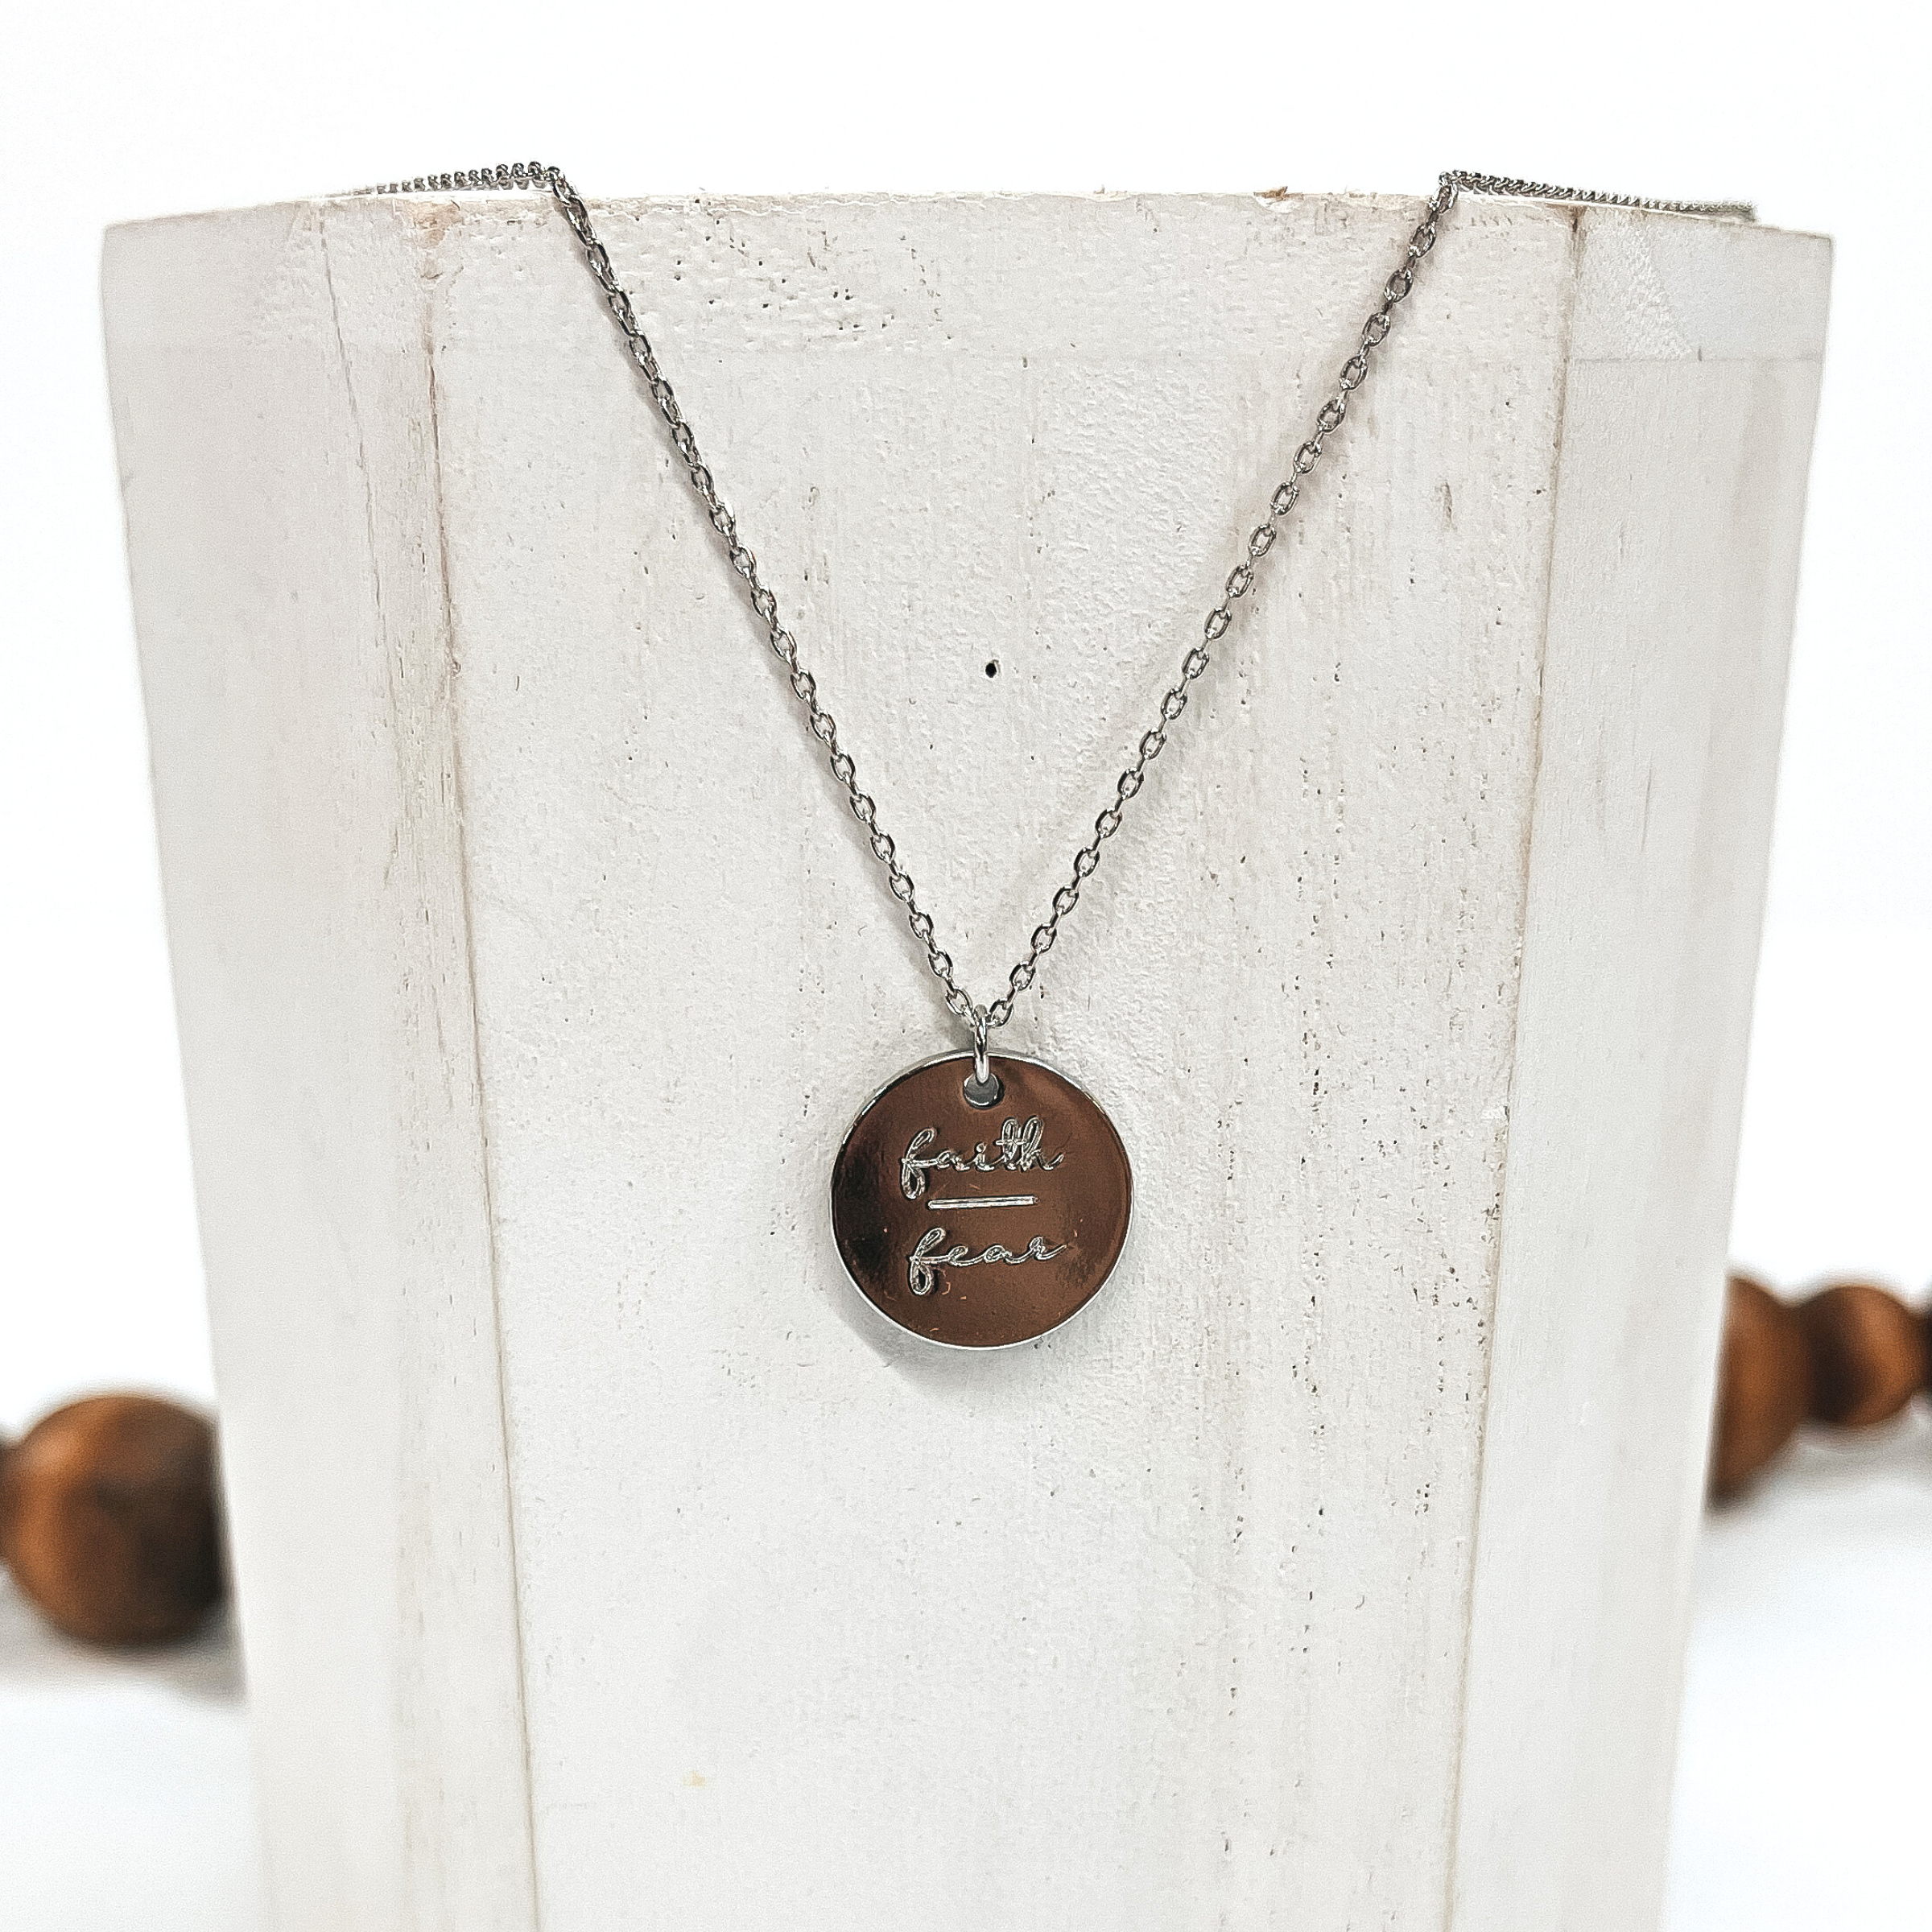 This is a thin silver necklace with a silver pendant that says, 'Faith over fear'.  This necklace is taken on a white block and on a white background with brown  beads in the back as decor.